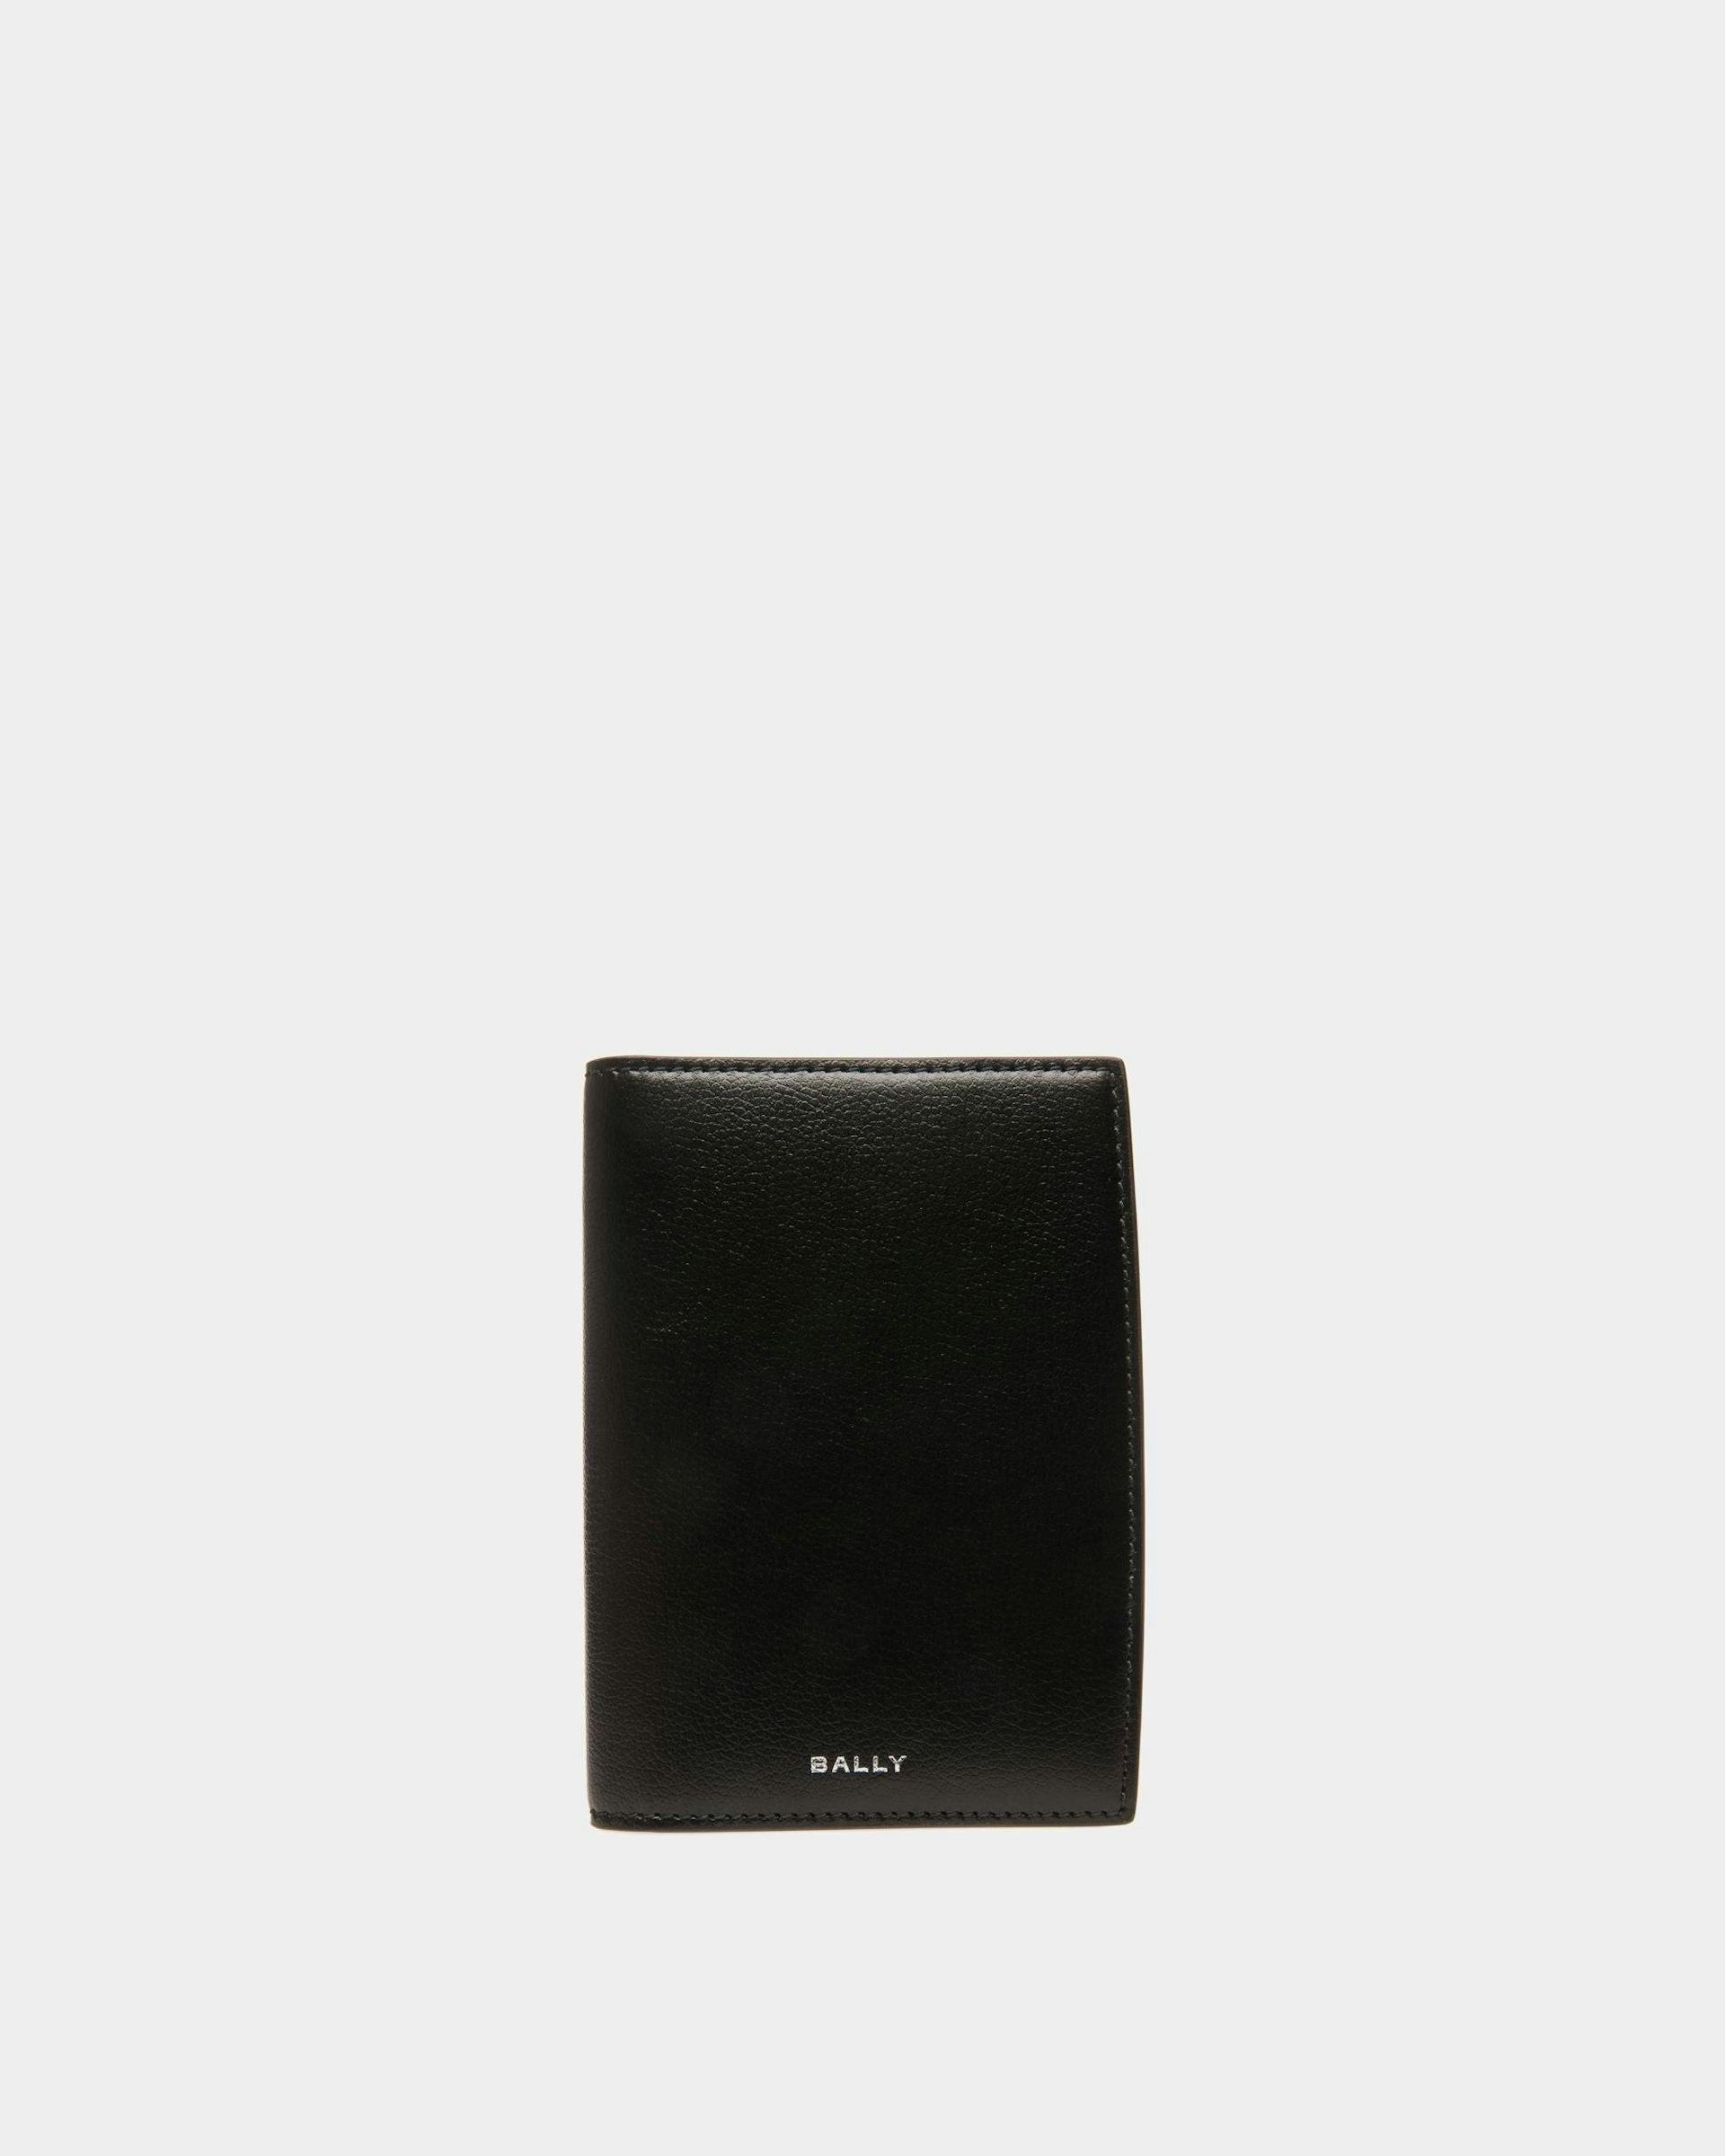 Men's Banque Passport Case In Black Leather | Bally | Still Life Front